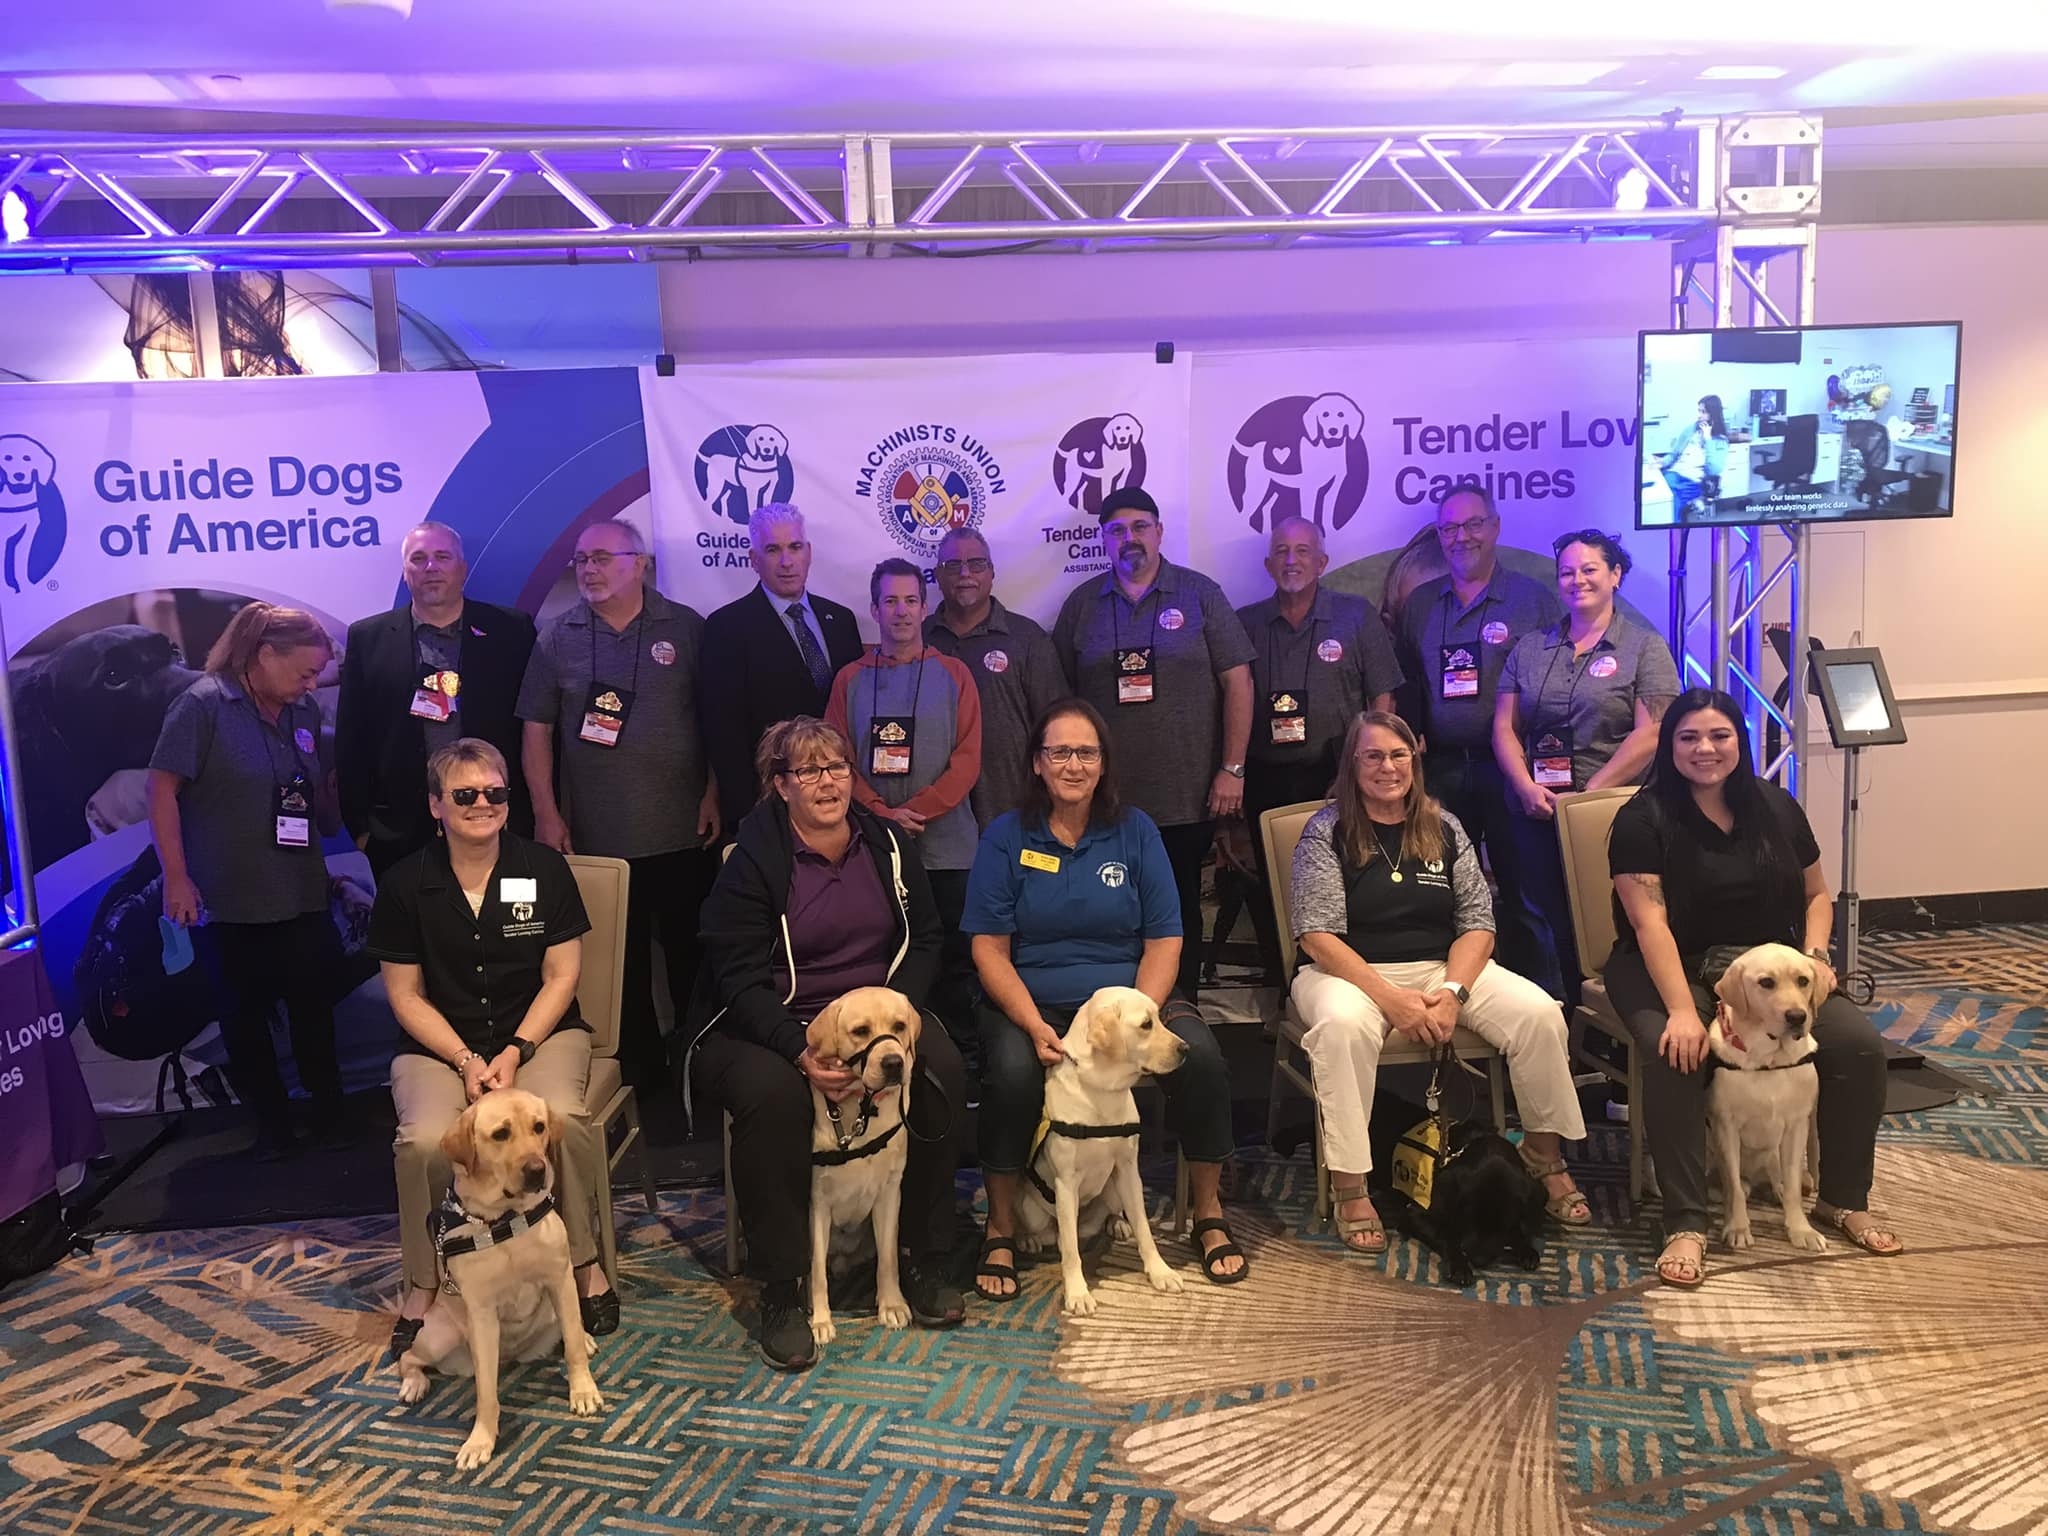 Machinists Union Commemorates National Philanthropy Day, Applauds the Work of Guide Dogs of America